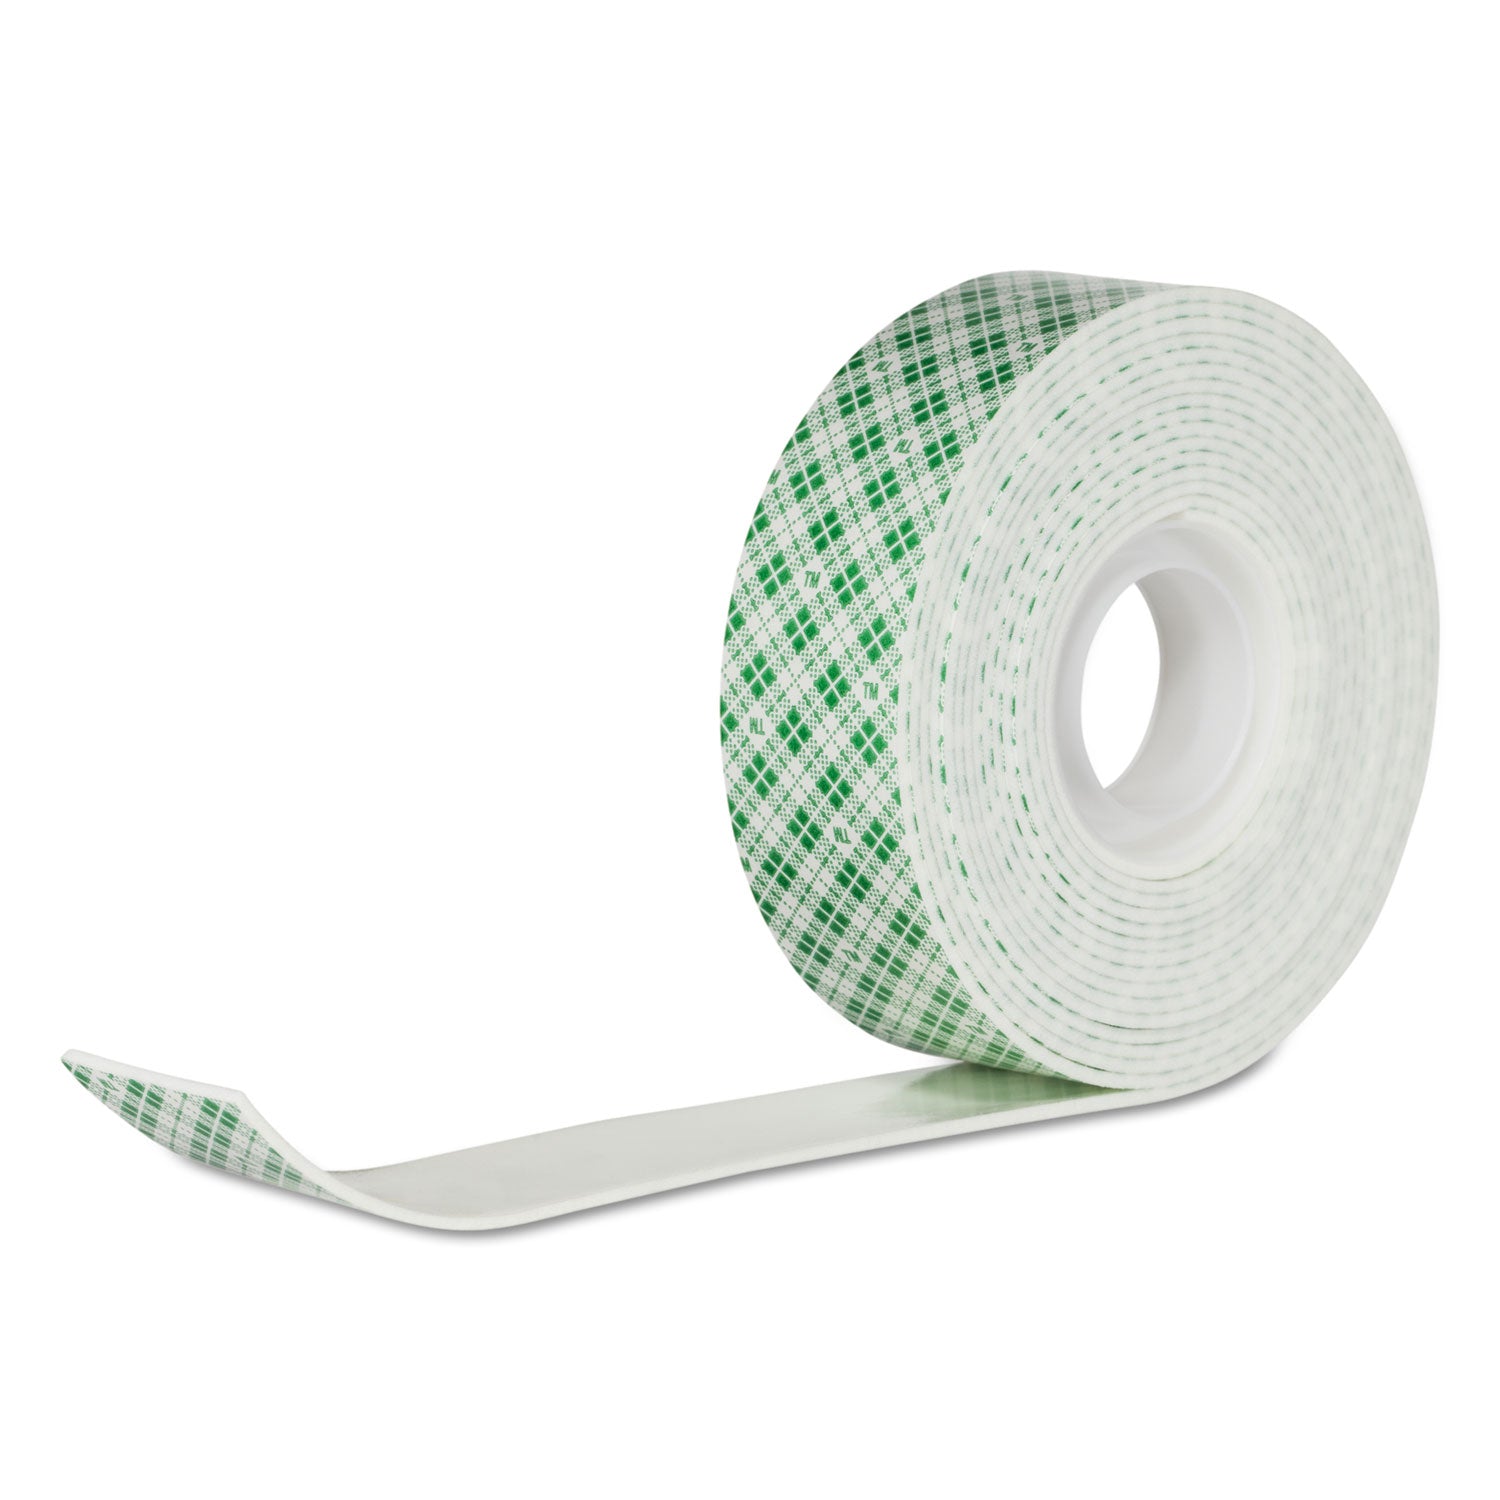 permanent-high-density-foam-mounting-tape-holds-up-to-15-lbs-1-x-125-white_mmm314smed - 3